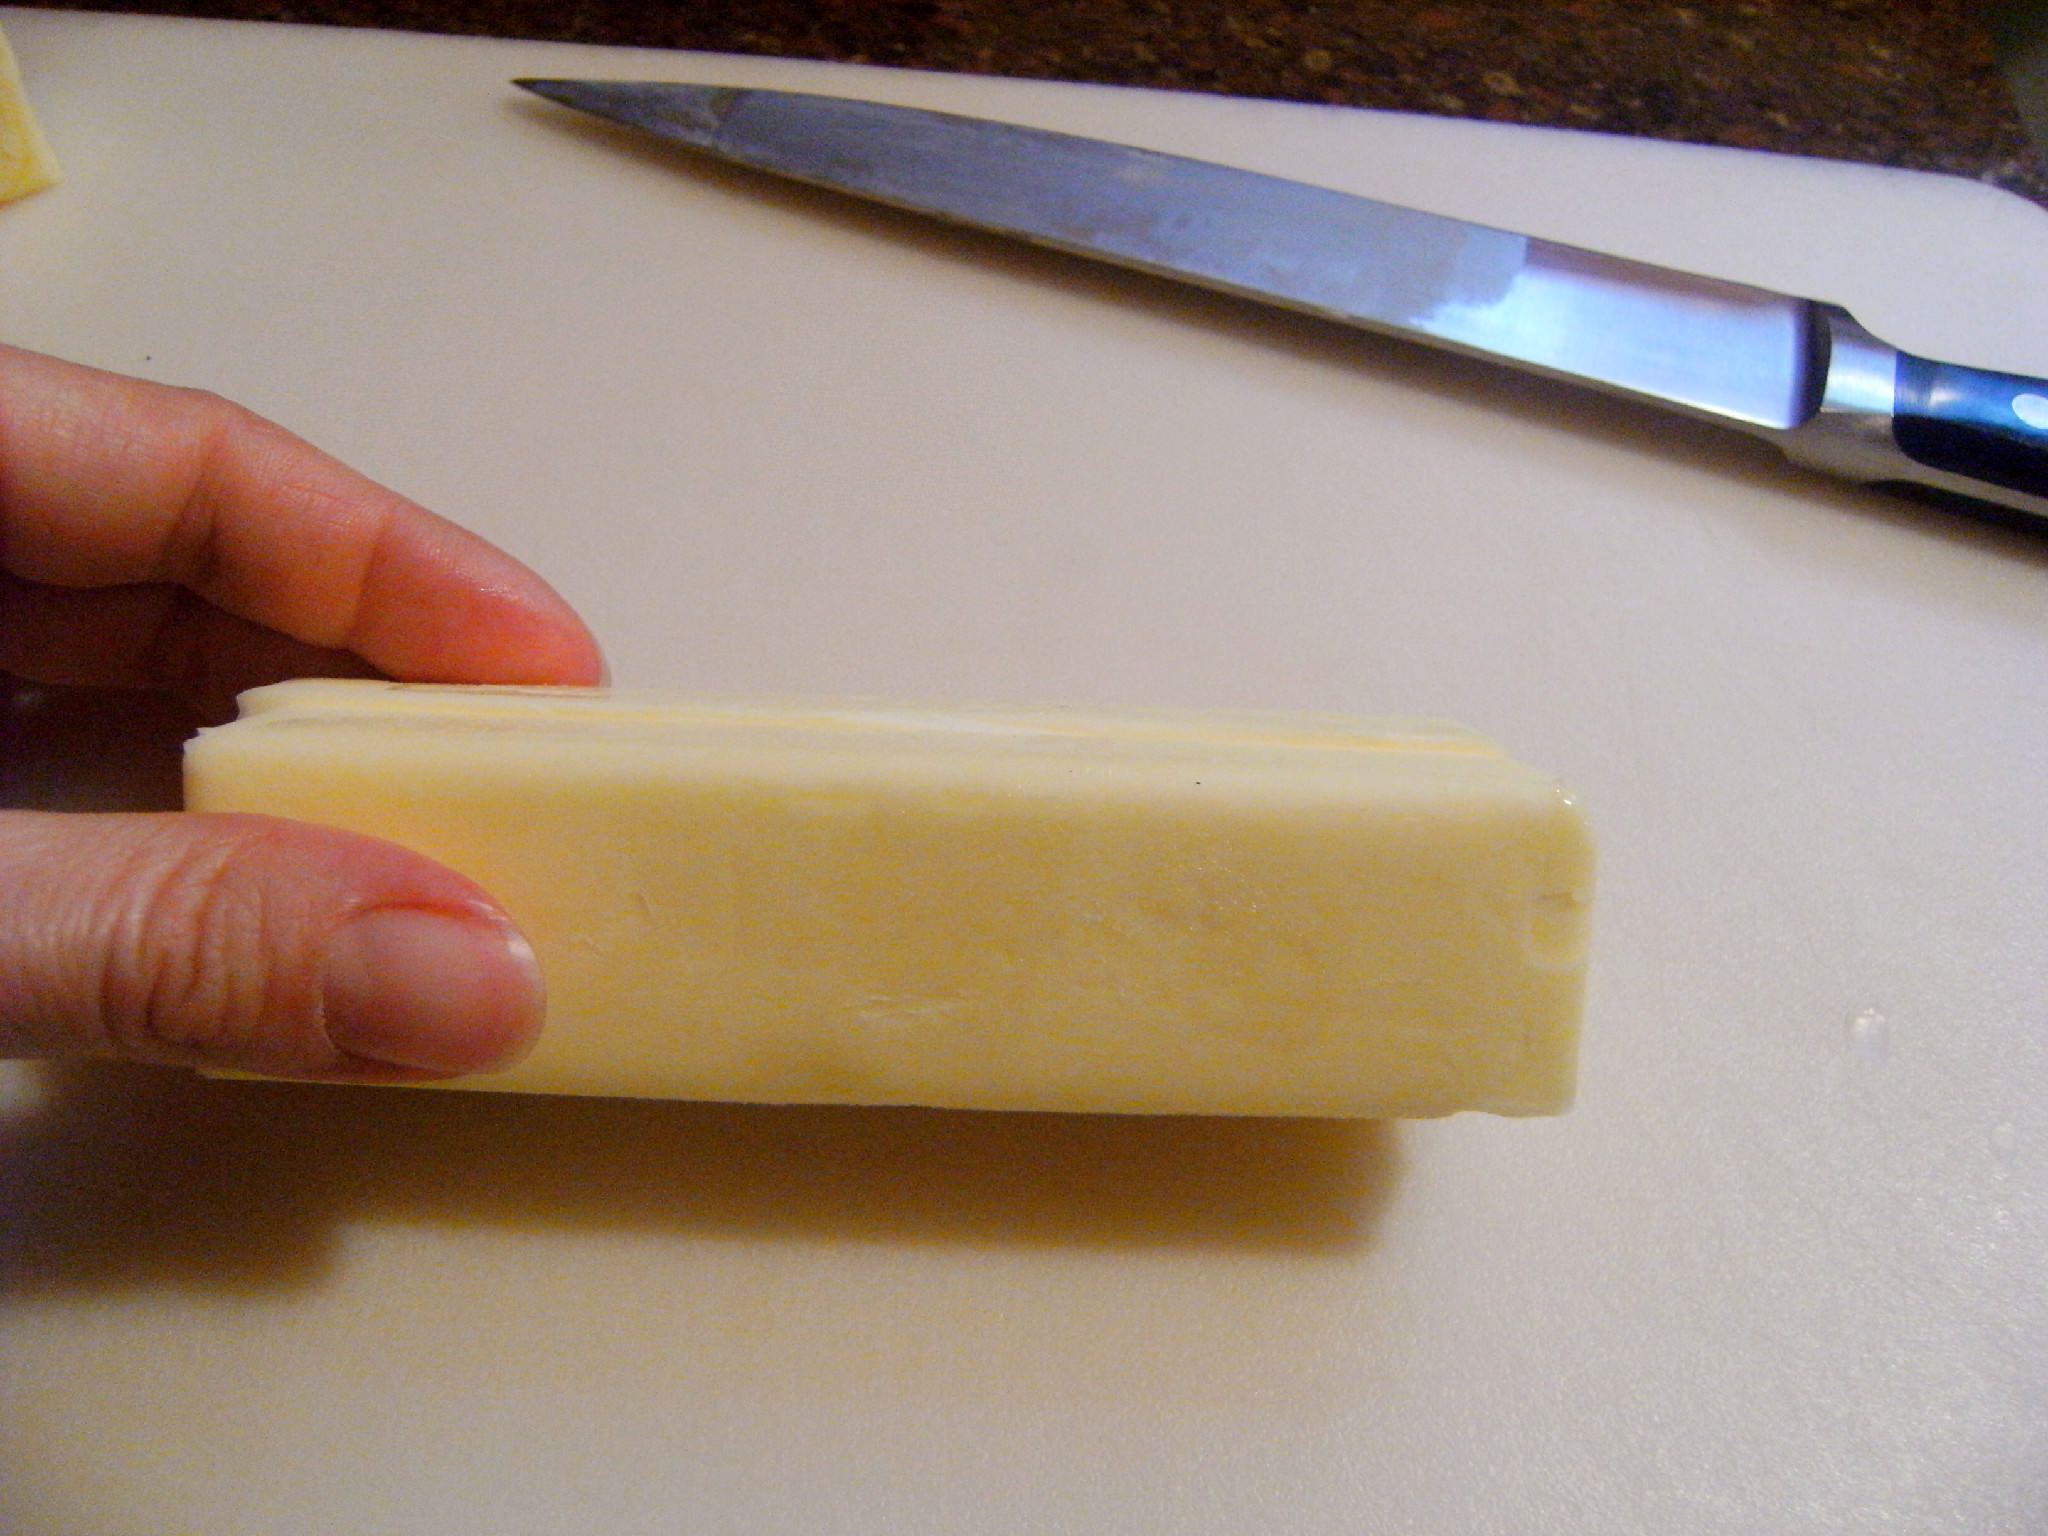 stick of butter, cut in half lengthwise